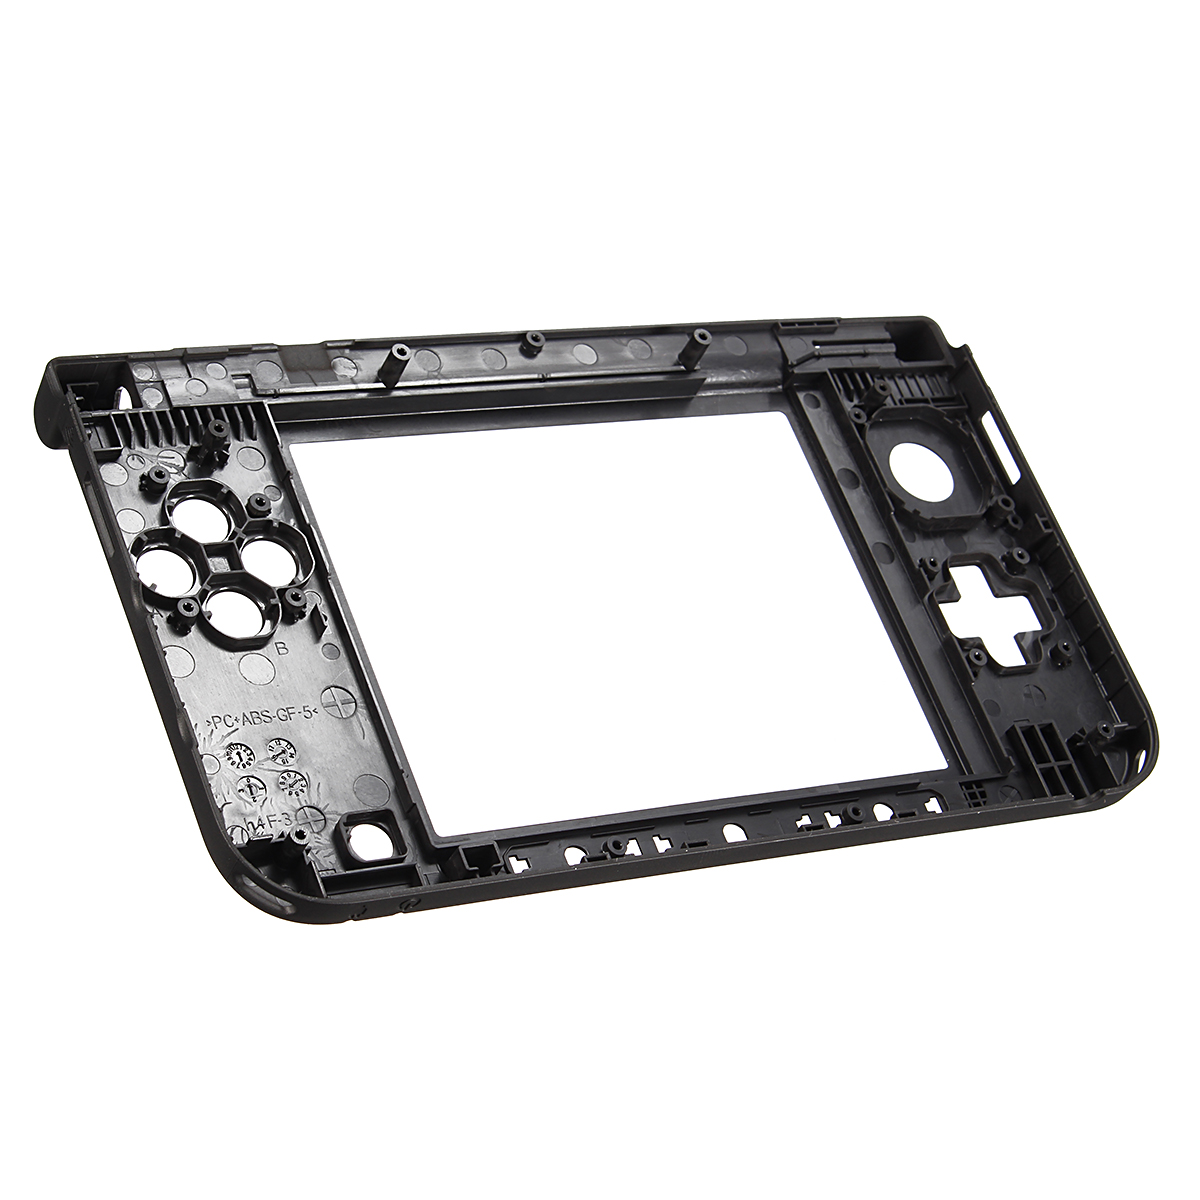 Replacement Bottom Middle Frame Housing Shell Cover Case for Nintendo 3DS XL 3DS LL Game Console 5